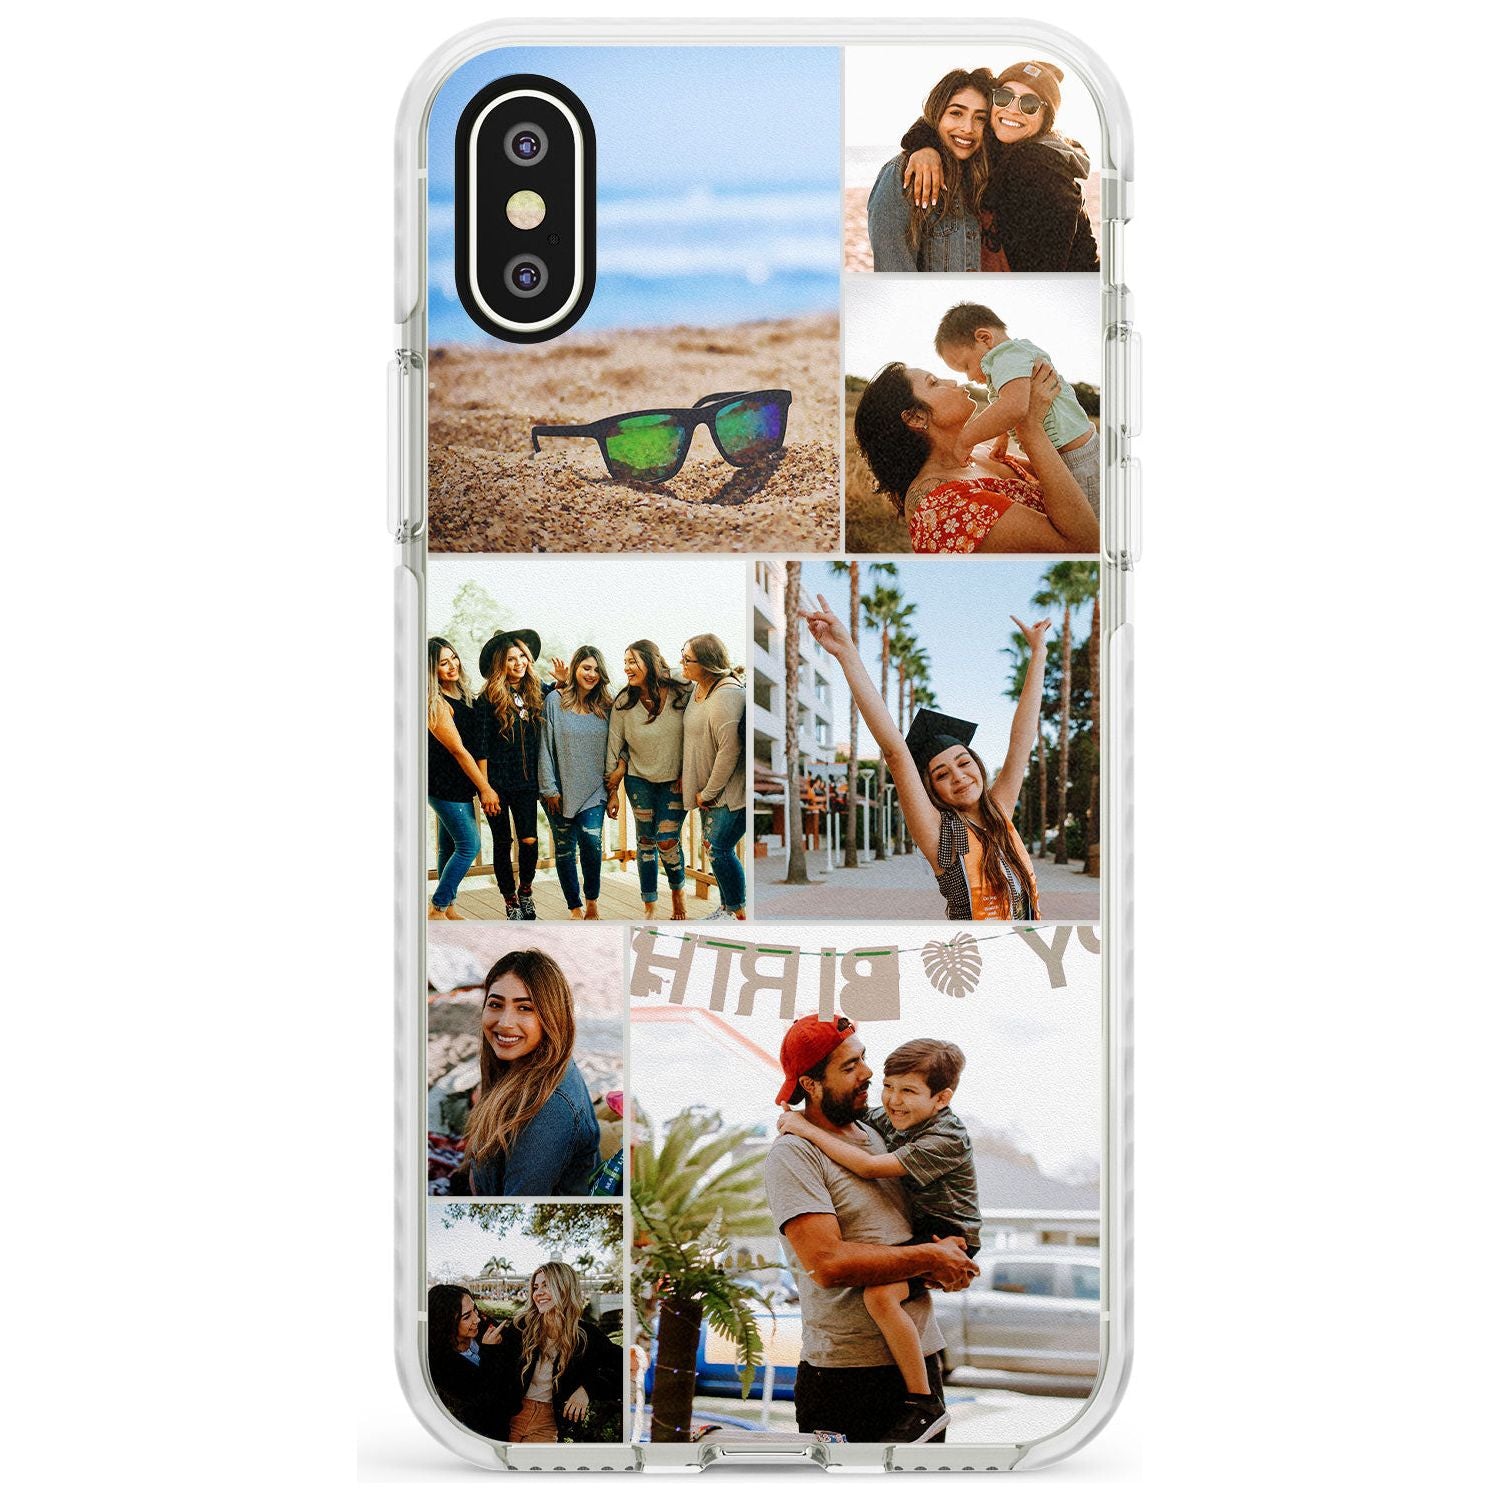 Personalised Vinyl Record Phone Case for iPhone X XS Max XR